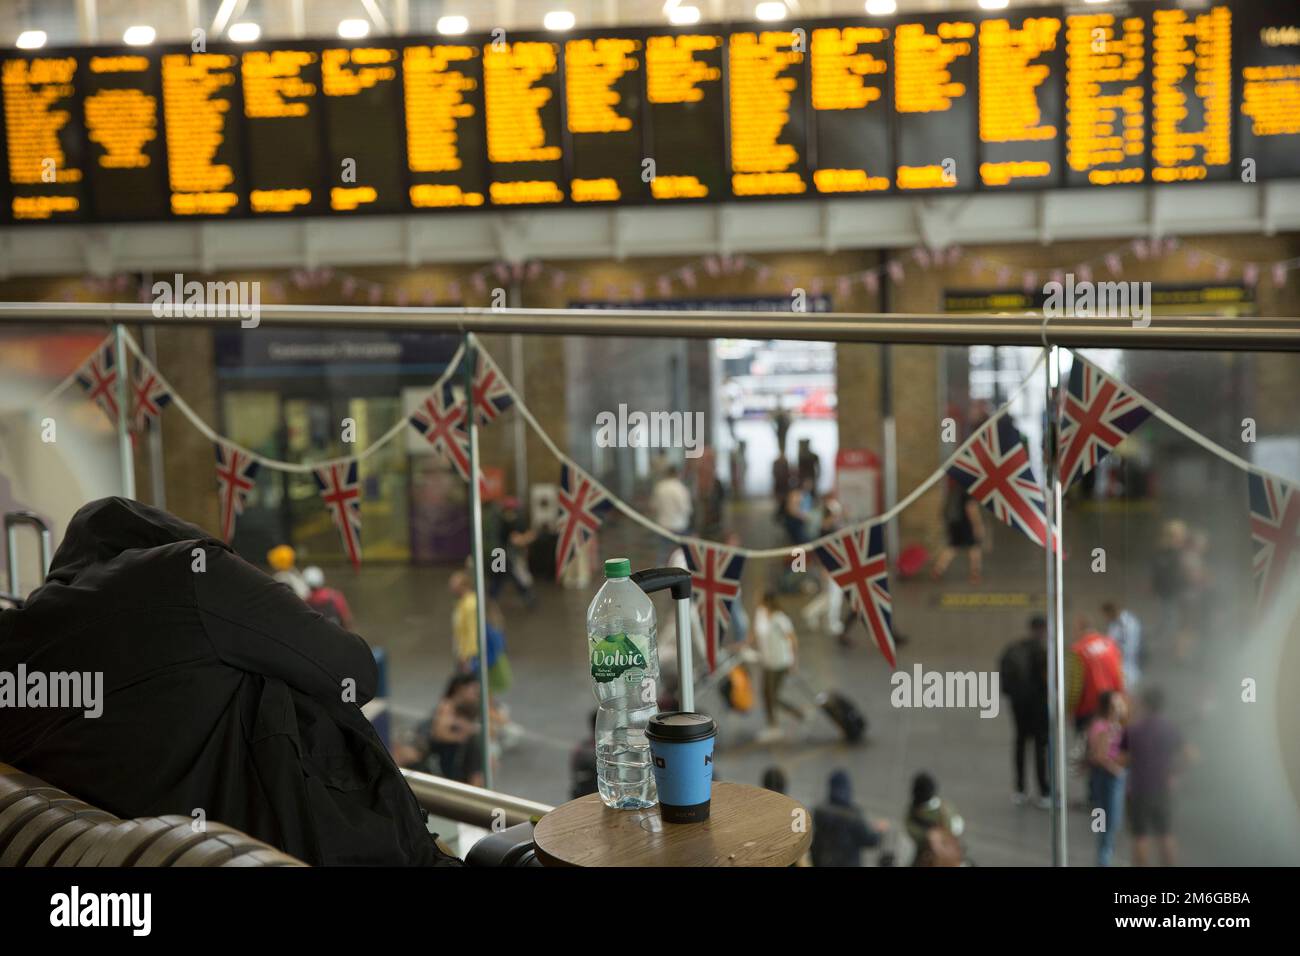 Backdropped by an electric timetable, a person sleeps on the bench at King's Cross station in London during a rail strike over pay and conditions. Stock Photo